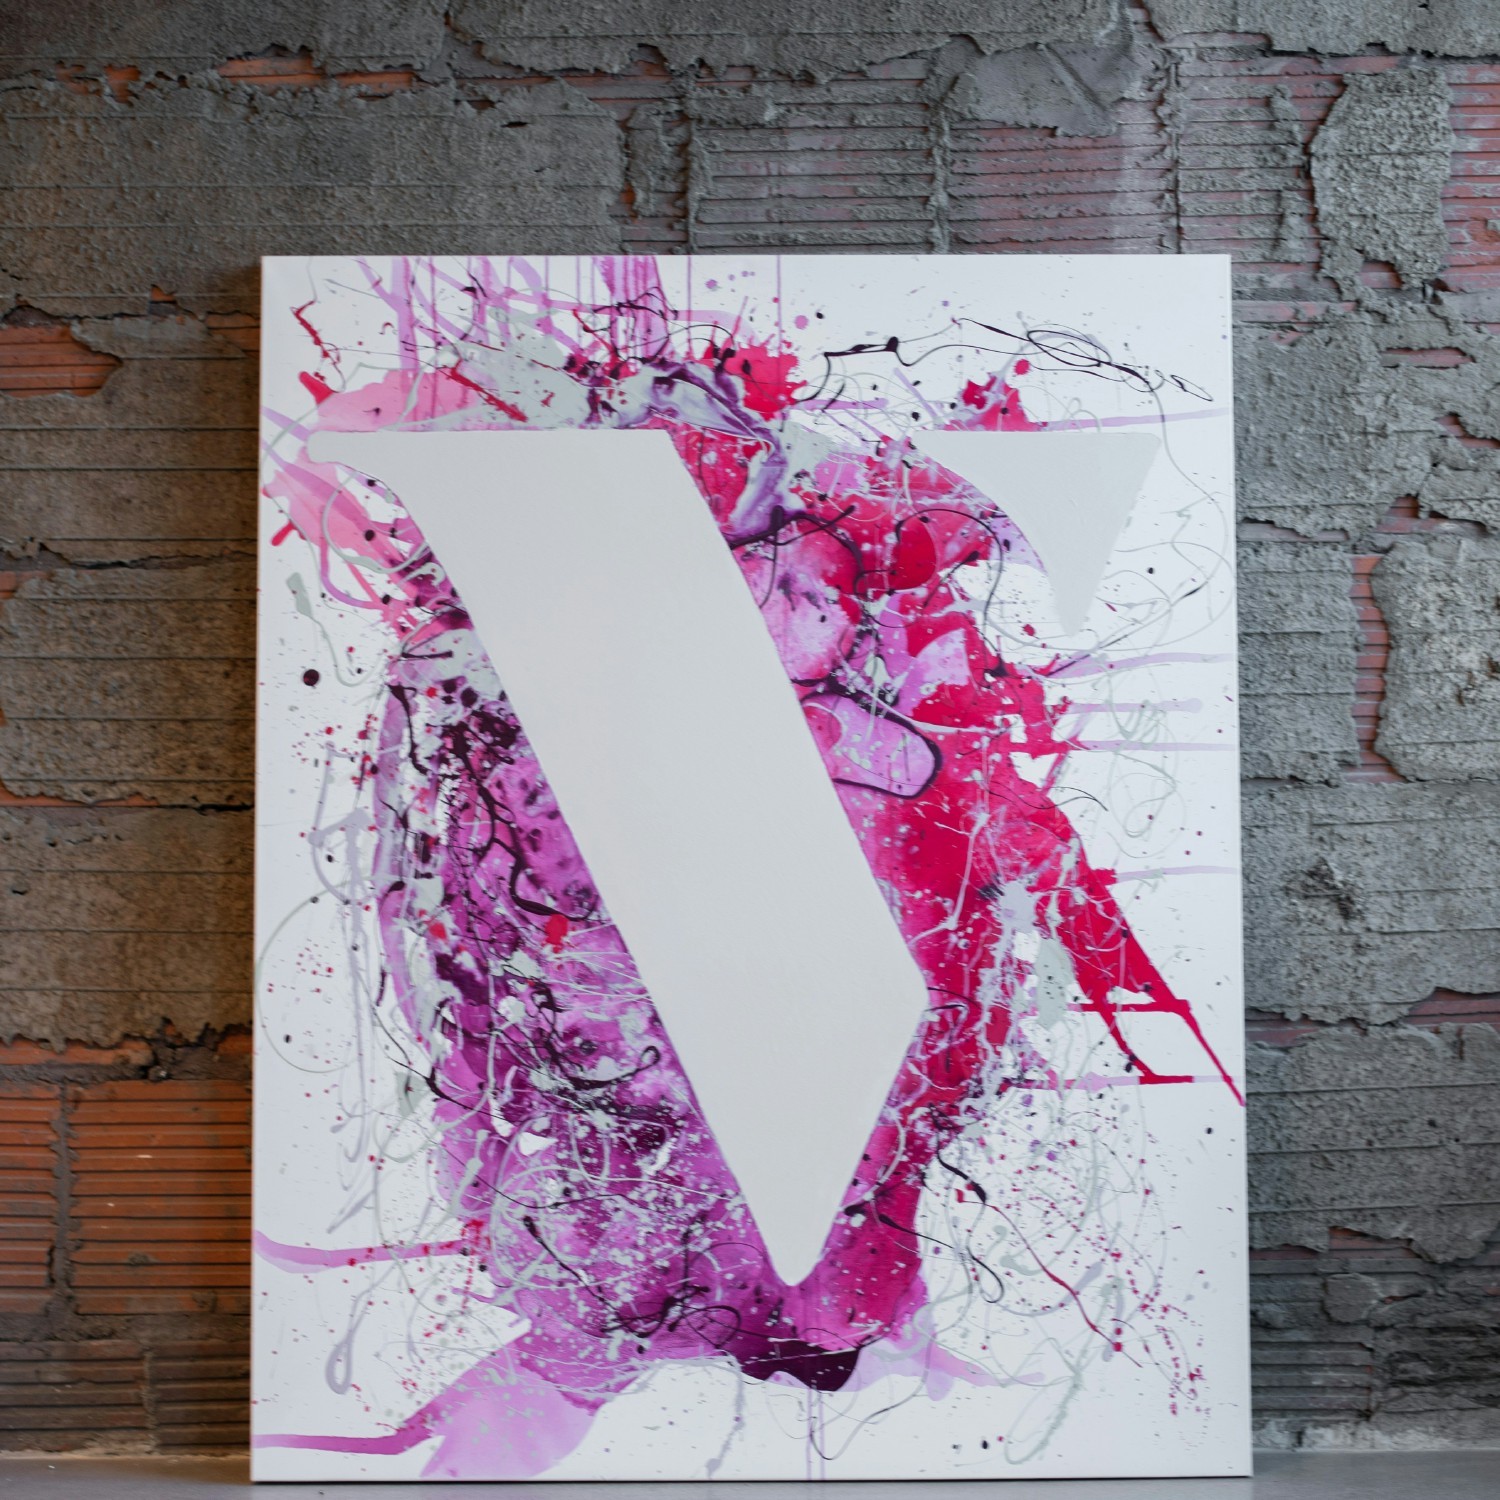 Uncommon creativity at Vye! Original artwork of the Vye logo in our Green Bay, WI office